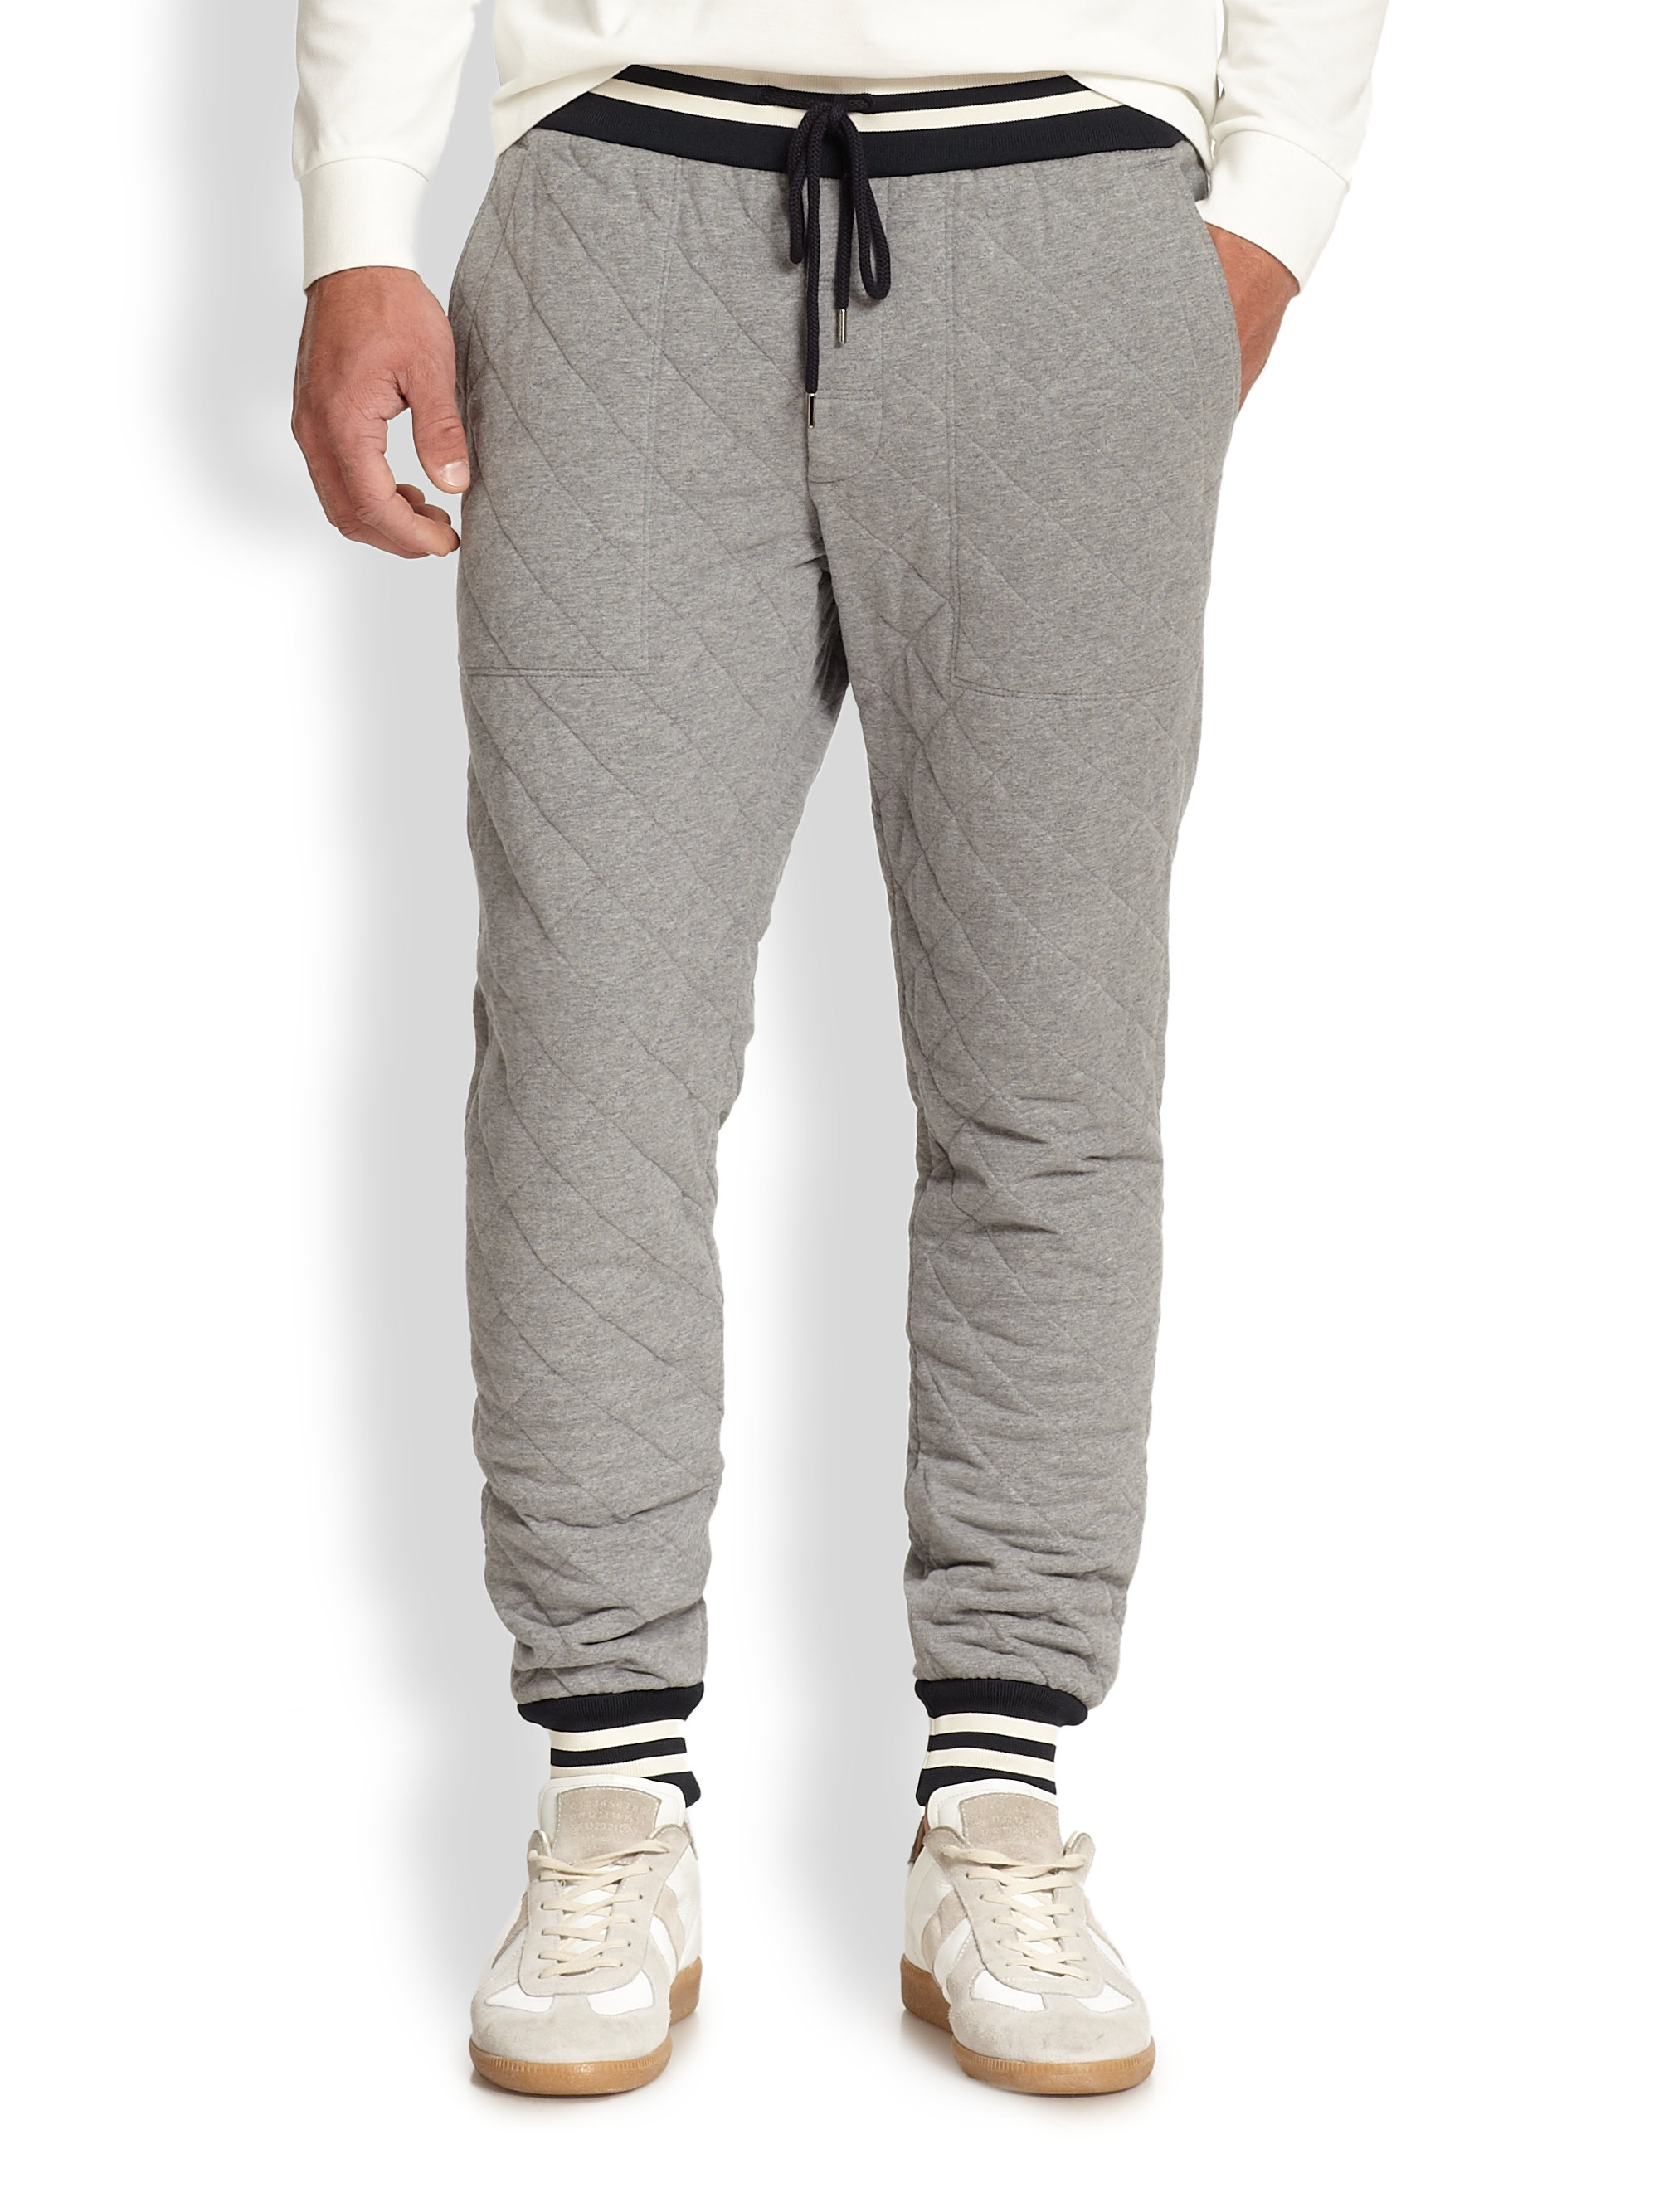 Lyst - Moncler Quilted Sweatpants in Gray for Men